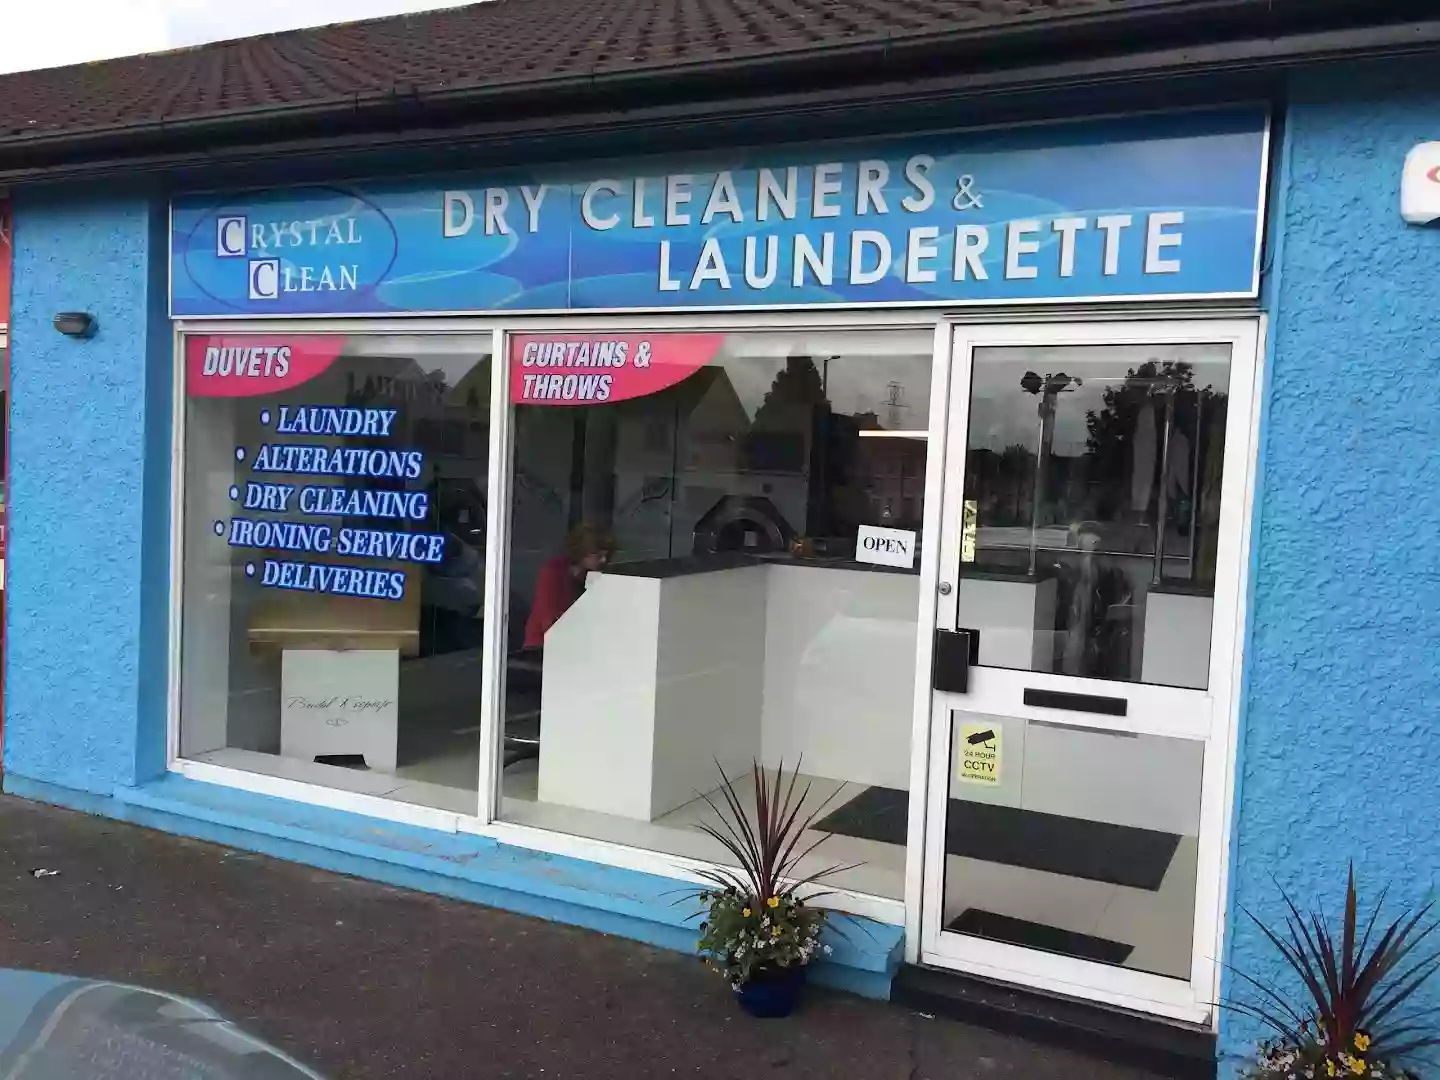 Crystal Clean Dry Cleaners and Laundrette